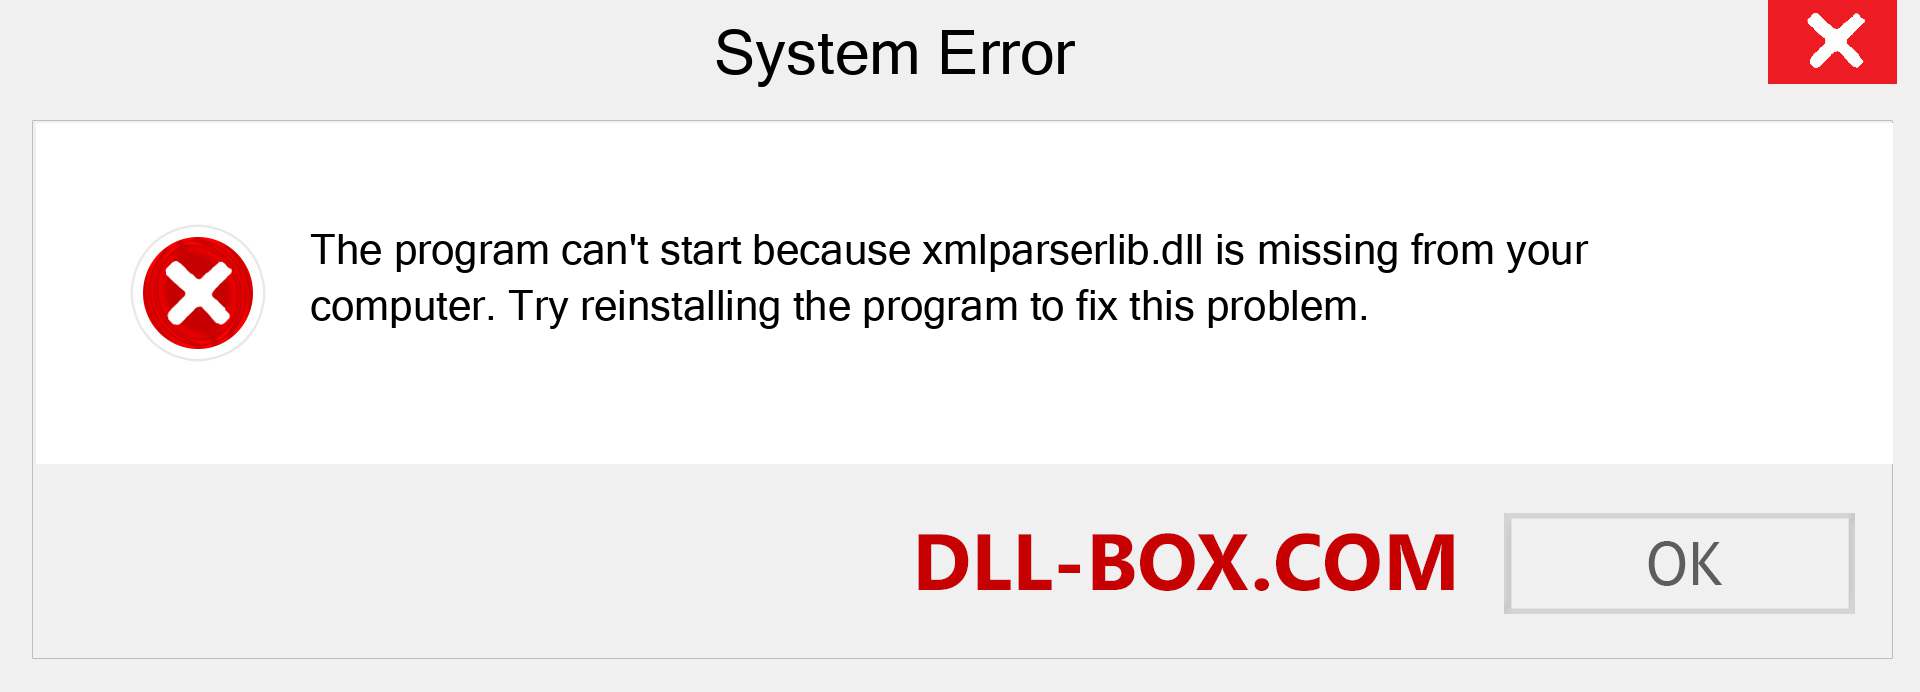  xmlparserlib.dll file is missing?. Download for Windows 7, 8, 10 - Fix  xmlparserlib dll Missing Error on Windows, photos, images